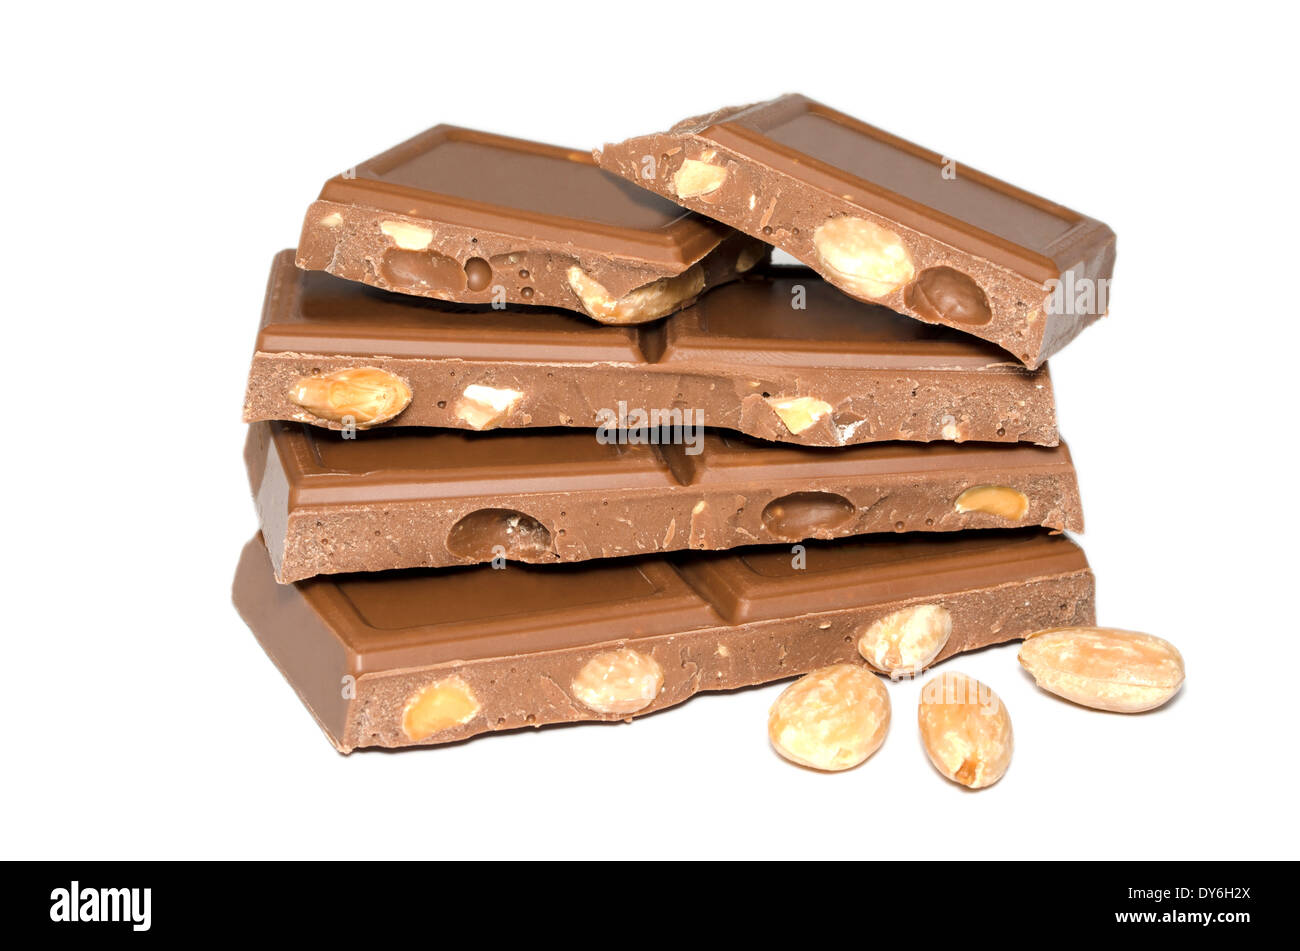 Slabs of assorted delightful chocolate almonds stacked on top of each other. Stock Photo